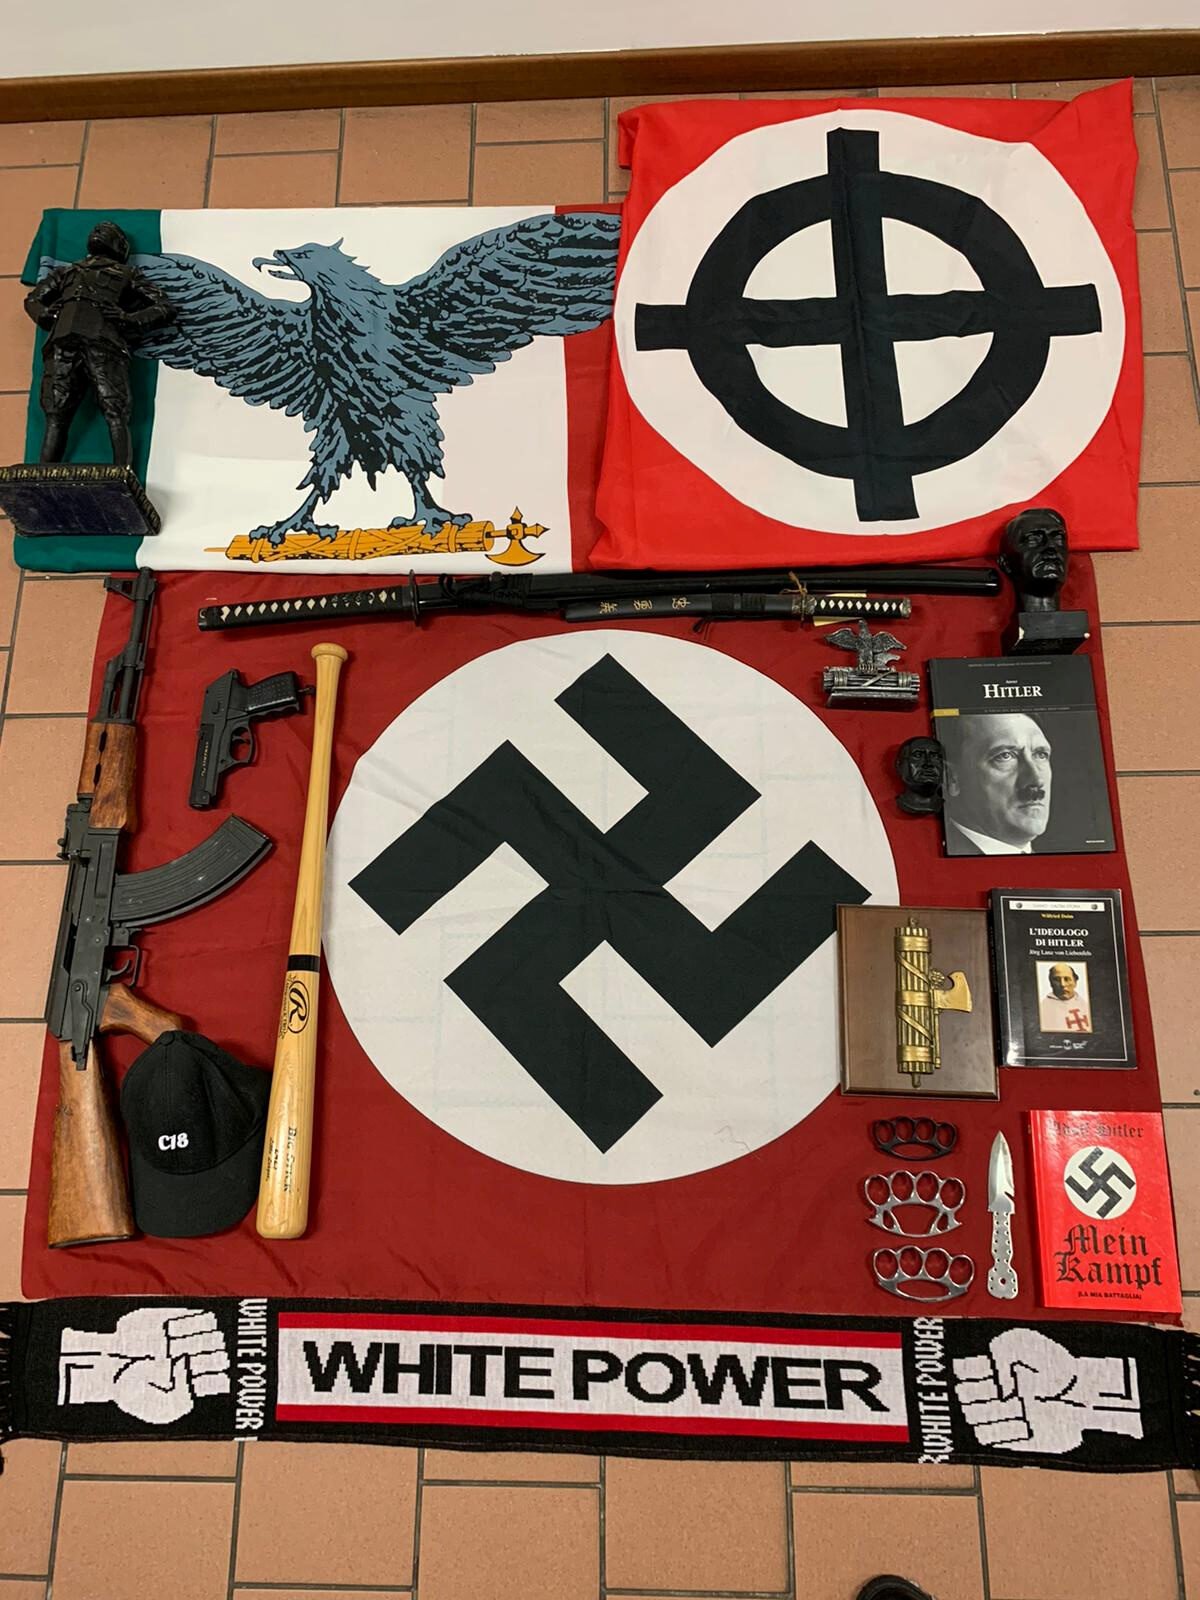 Weapons and a flag with the German Nazi's swastika are displayed by Italian police after they were seized in a raid on a neo-nazi group in Italy, Nov. 28, 2019. (Polizia di Stato/Handout via REUTERS)